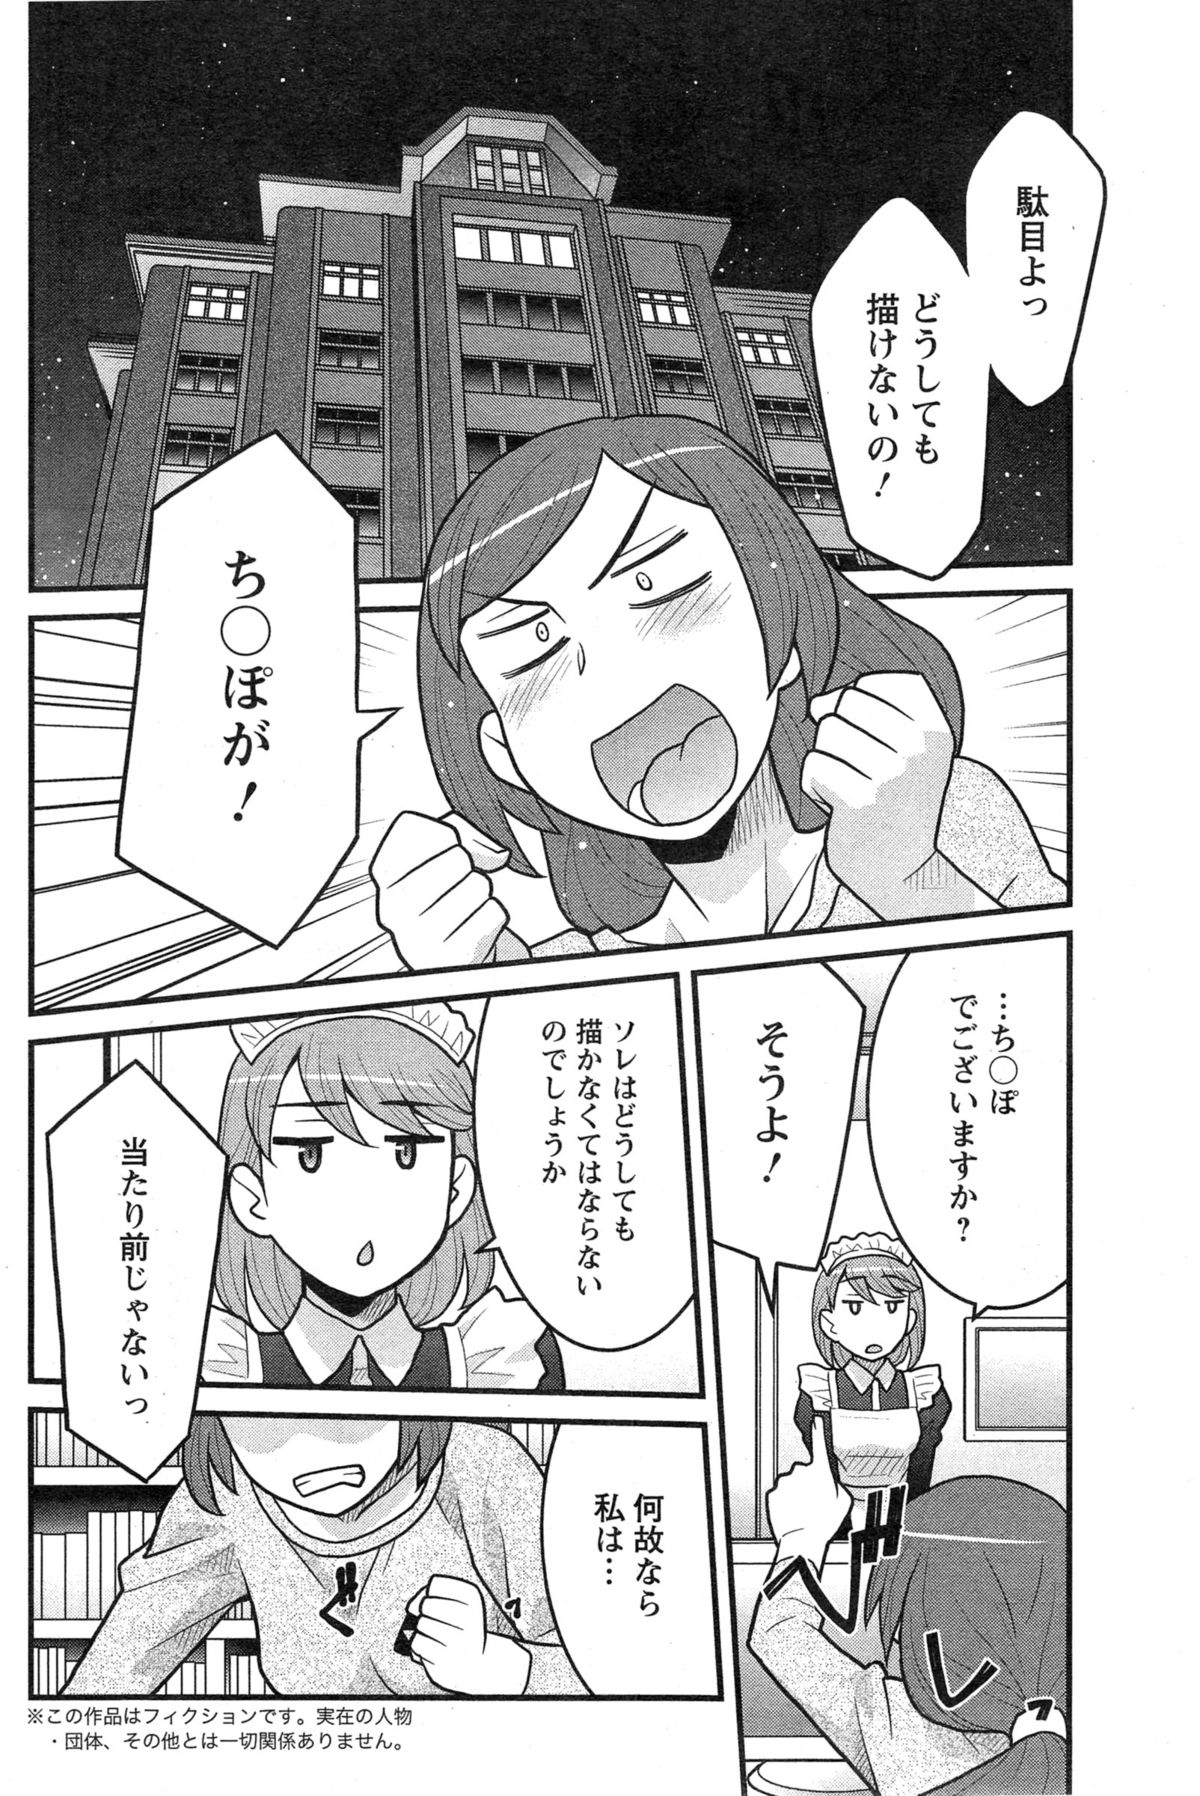 Action Pizazz DX 2015-03 page 8 full